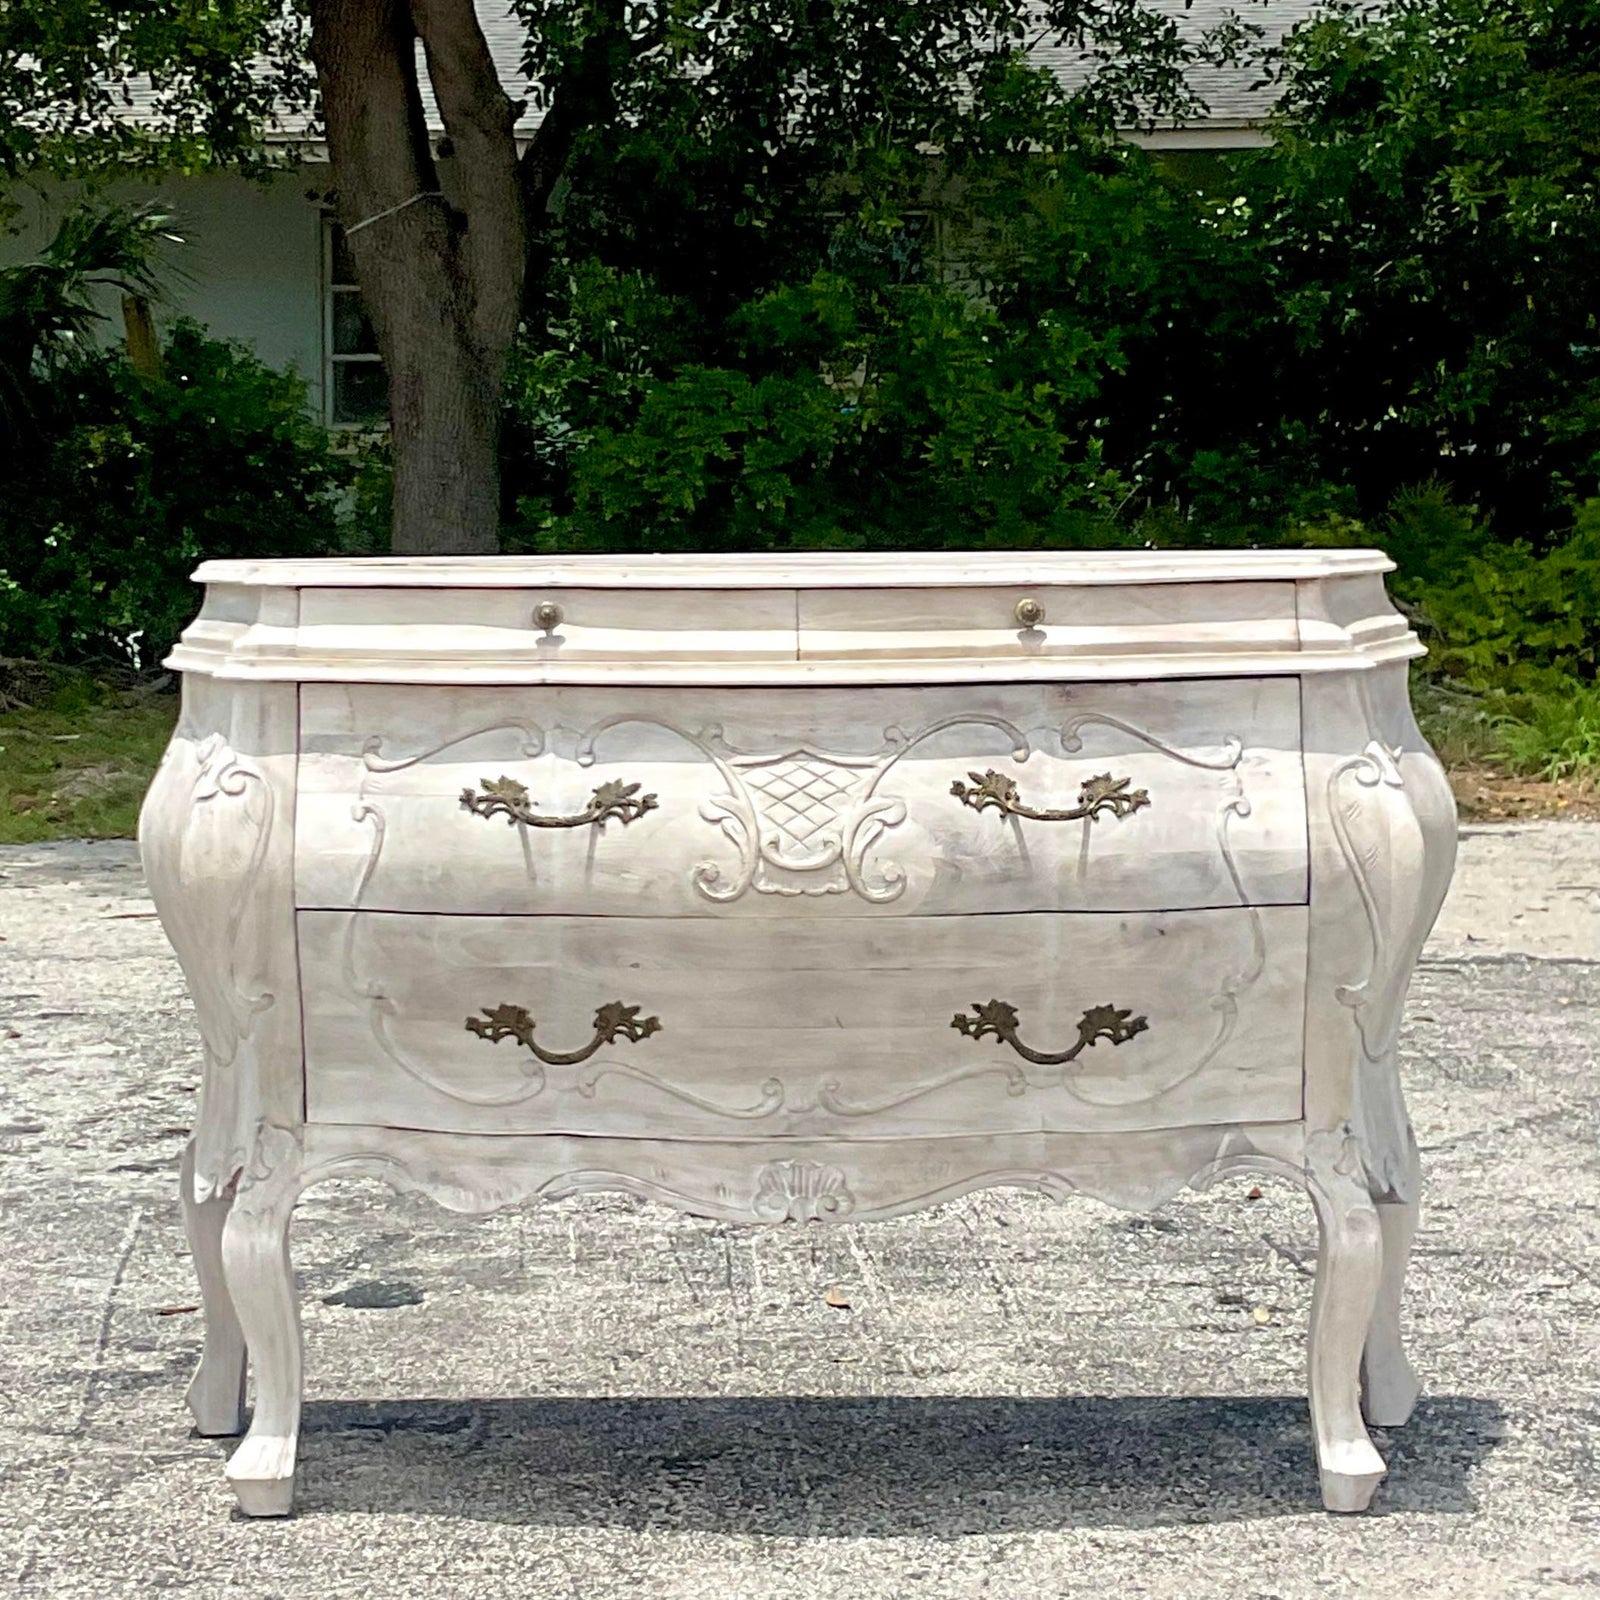 A stunning vintage Regency Chest of drawers. A beautiful hand carved Bombe chest in a chic cerused finish. A rolling bow front with Cabriolet legs. Acquired from a Palm Beach estate.